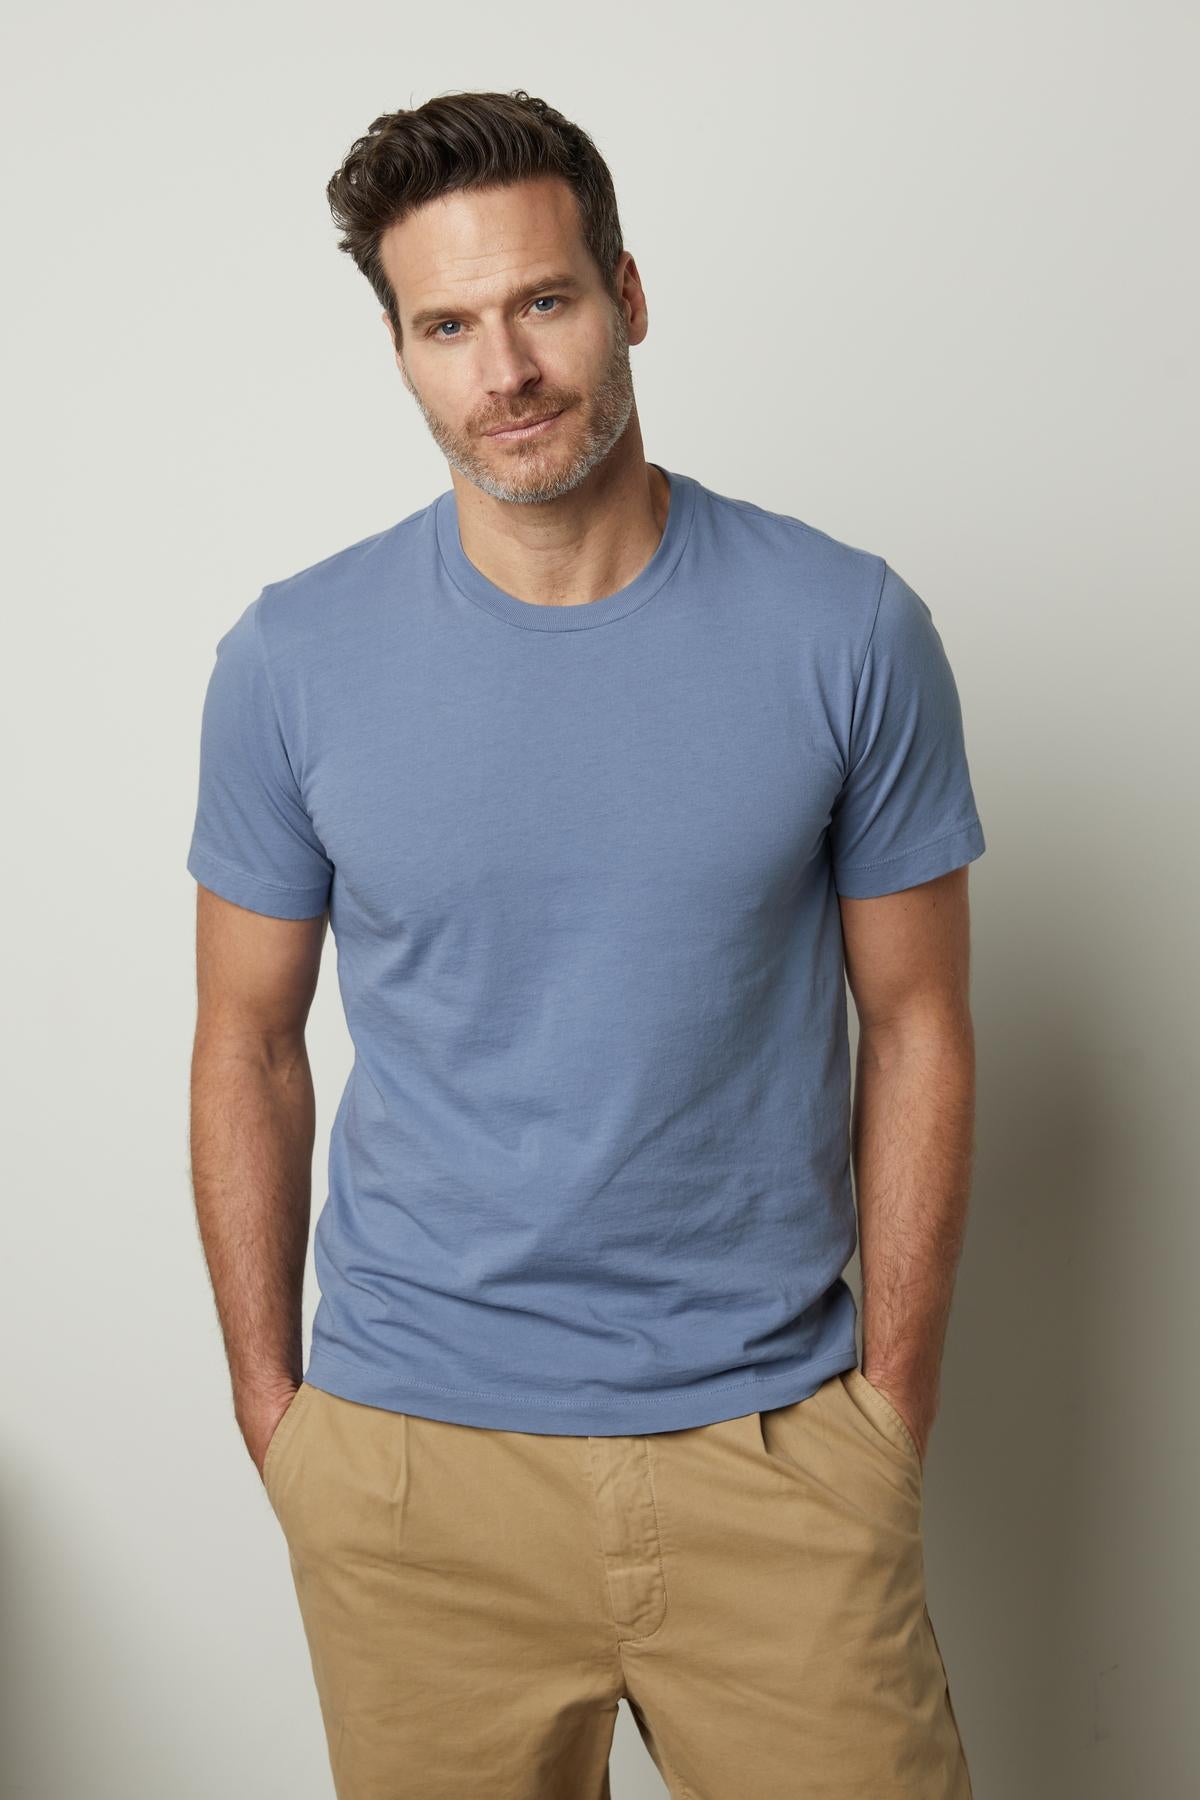   A man wearing a RANDY CREW NECK TEE by Velvet by Graham & Spencer and khaki pants. 